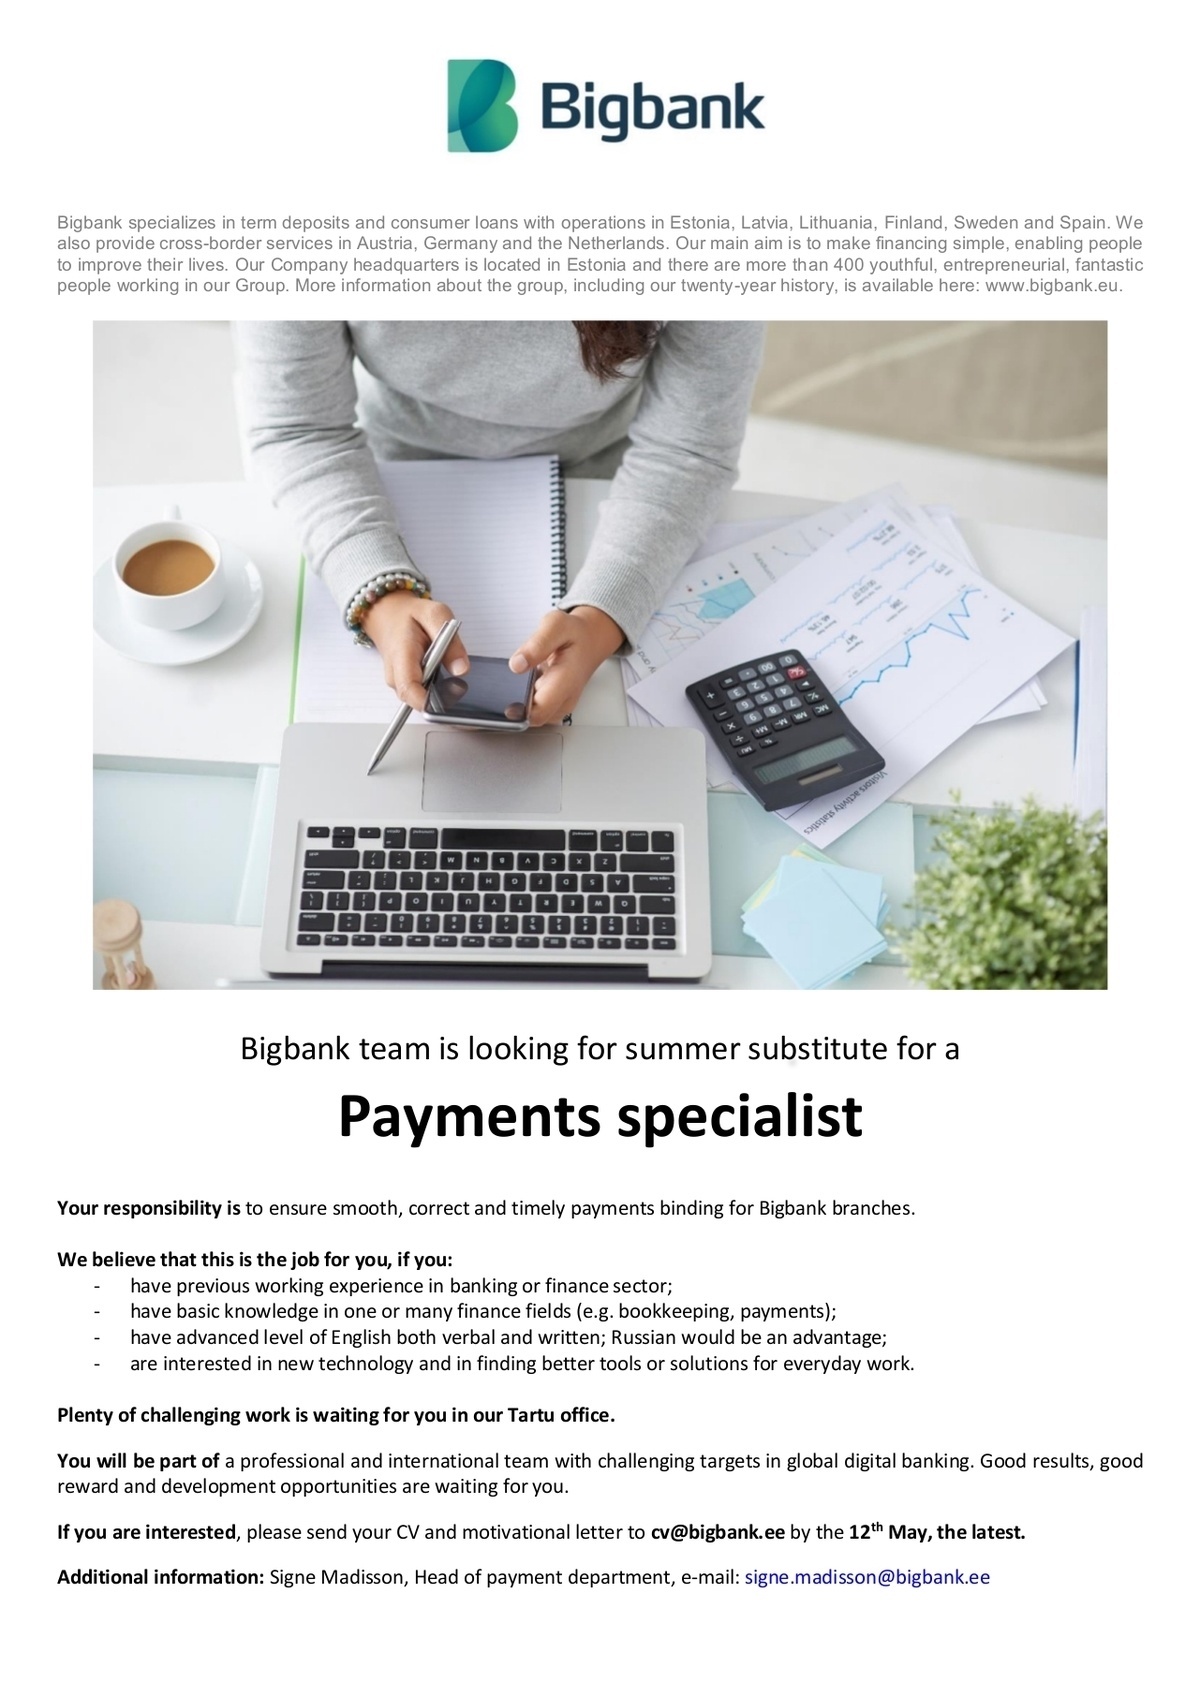 Bigbank AS Payments specialist